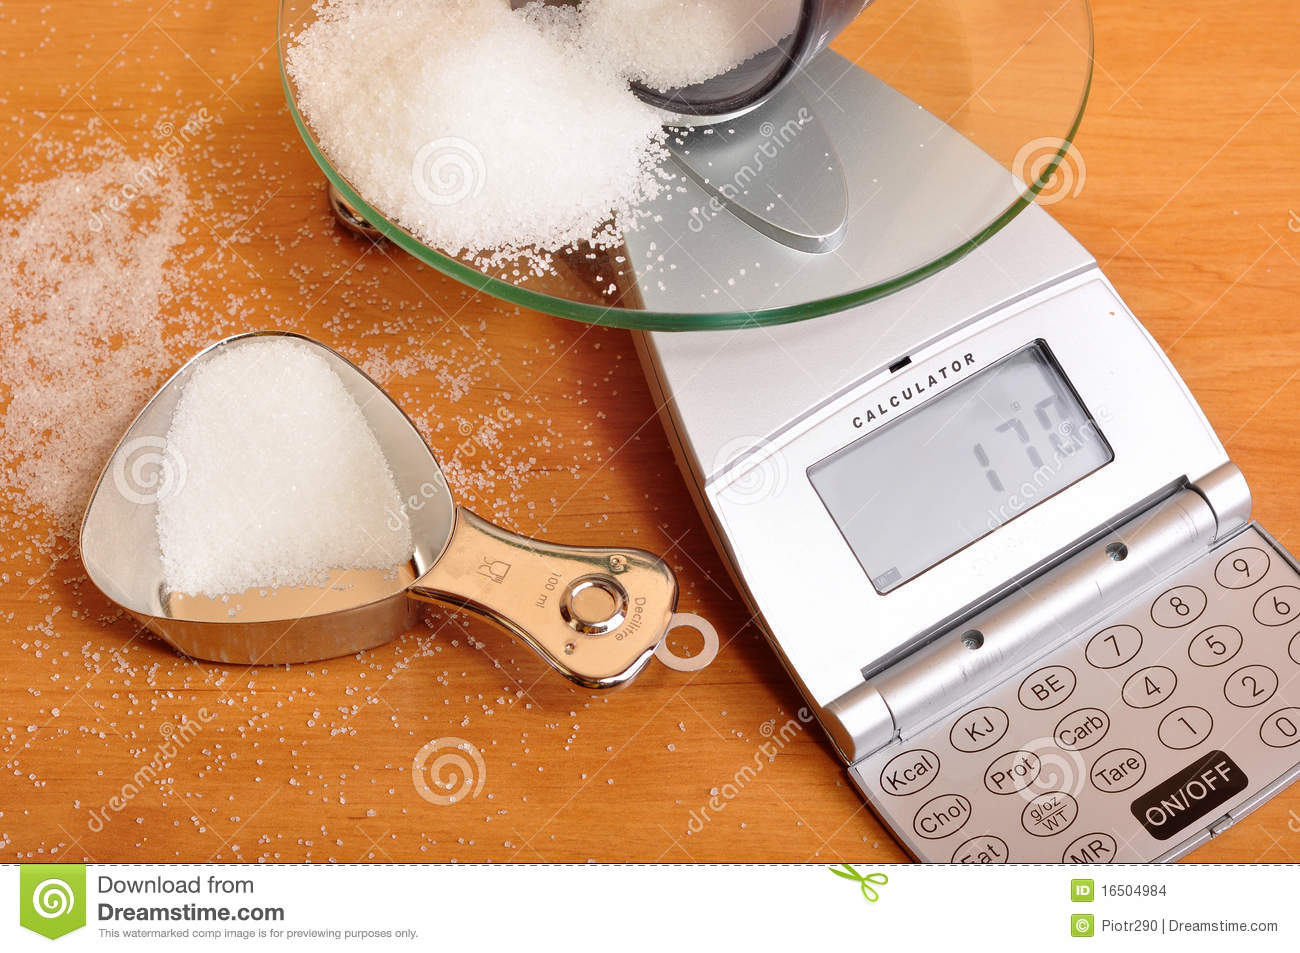 Weighing Sugar On Scale  Stock Images   Image  16504984